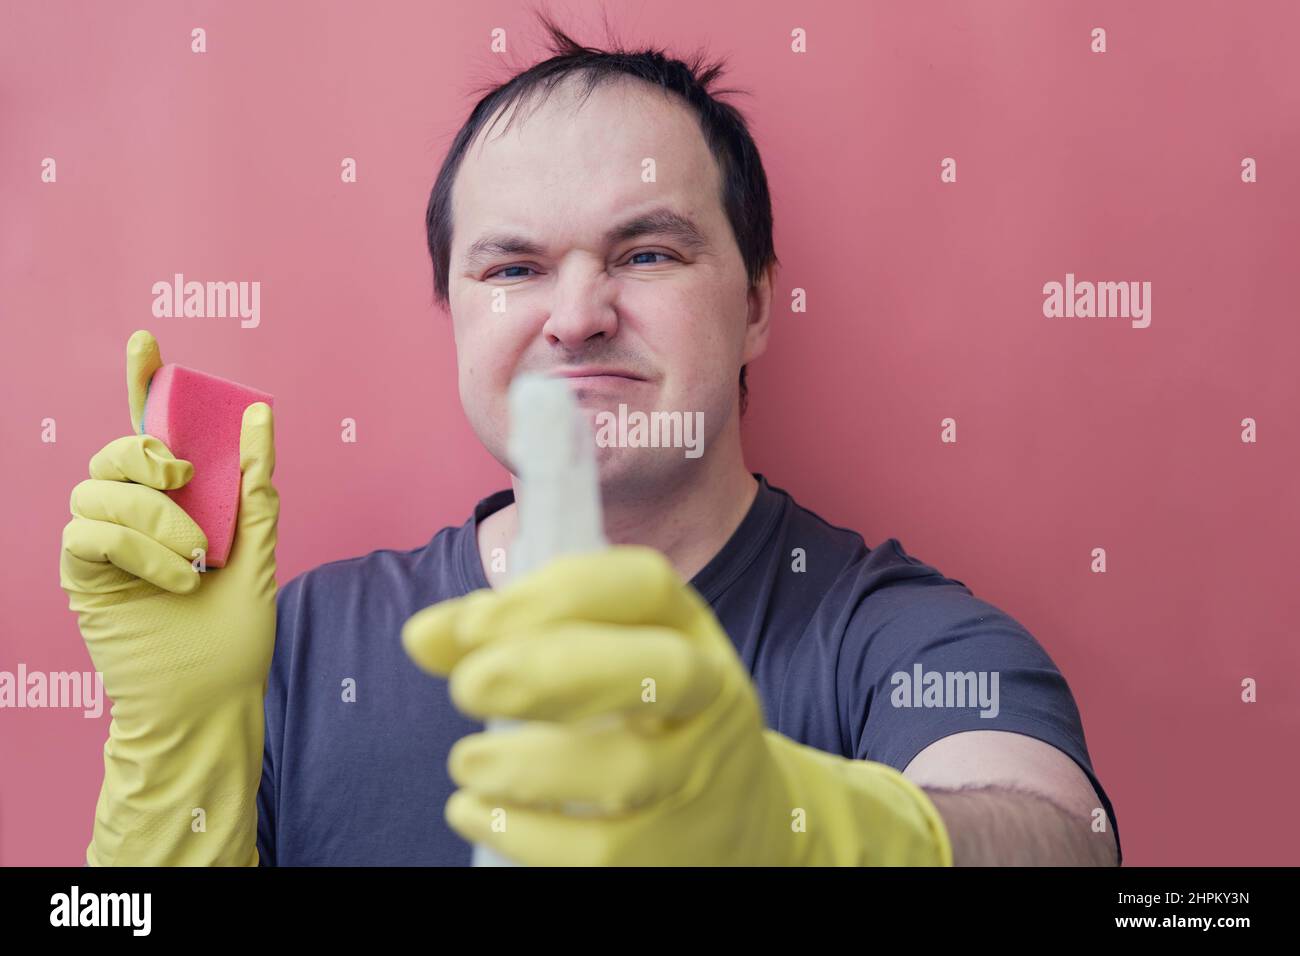 Angry man janitor in yellow gloves, studio red background Stock Photo